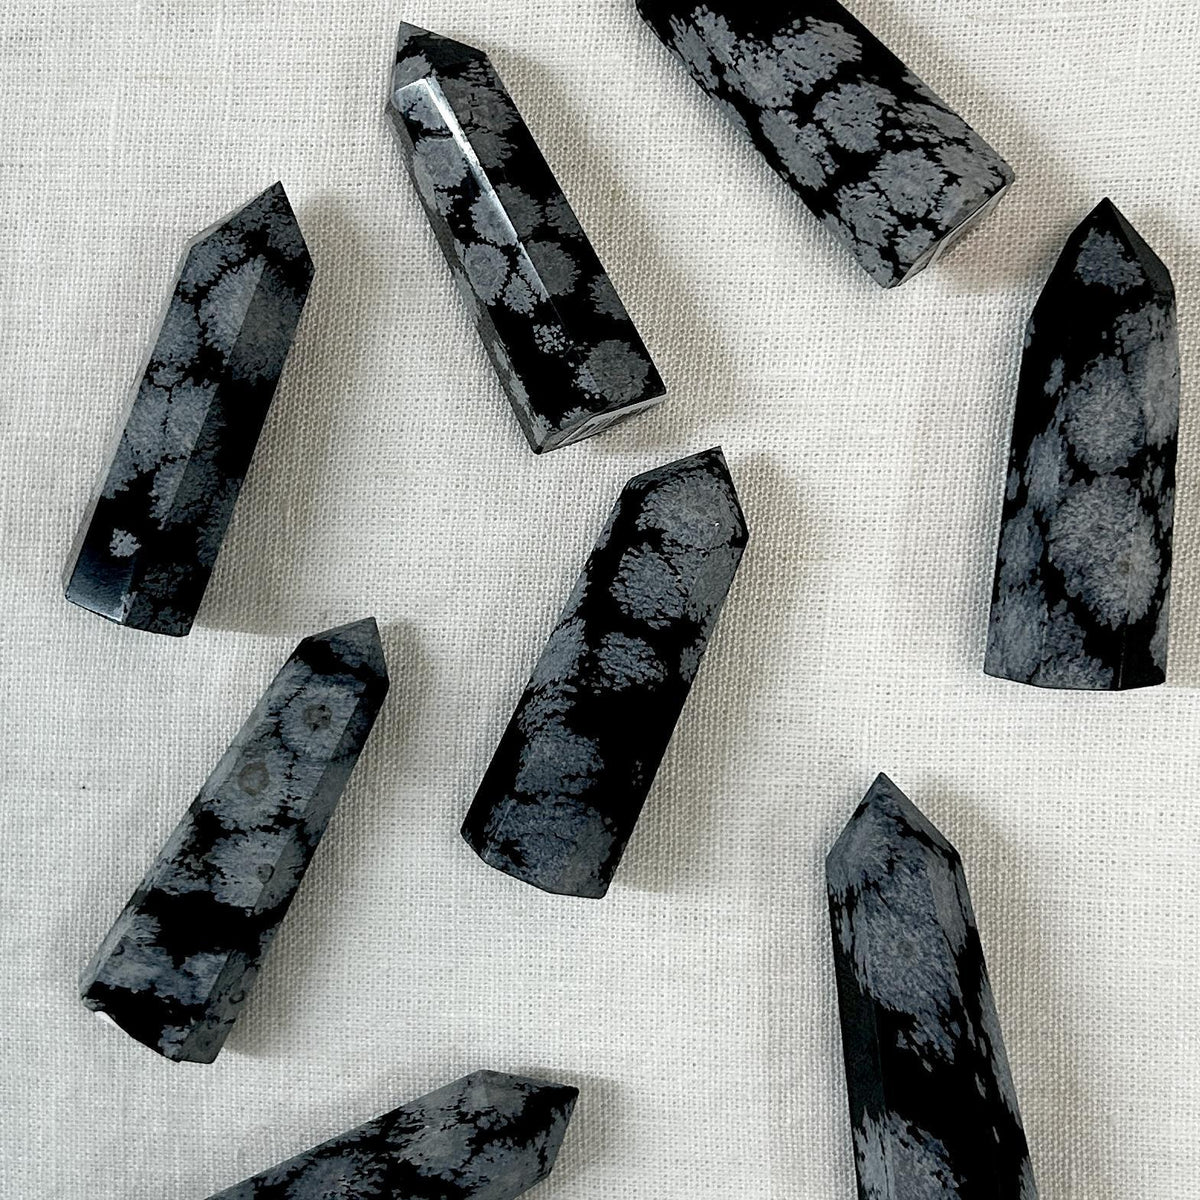 Snowflake Obsidian Crystal Tower Intuitively Chosen